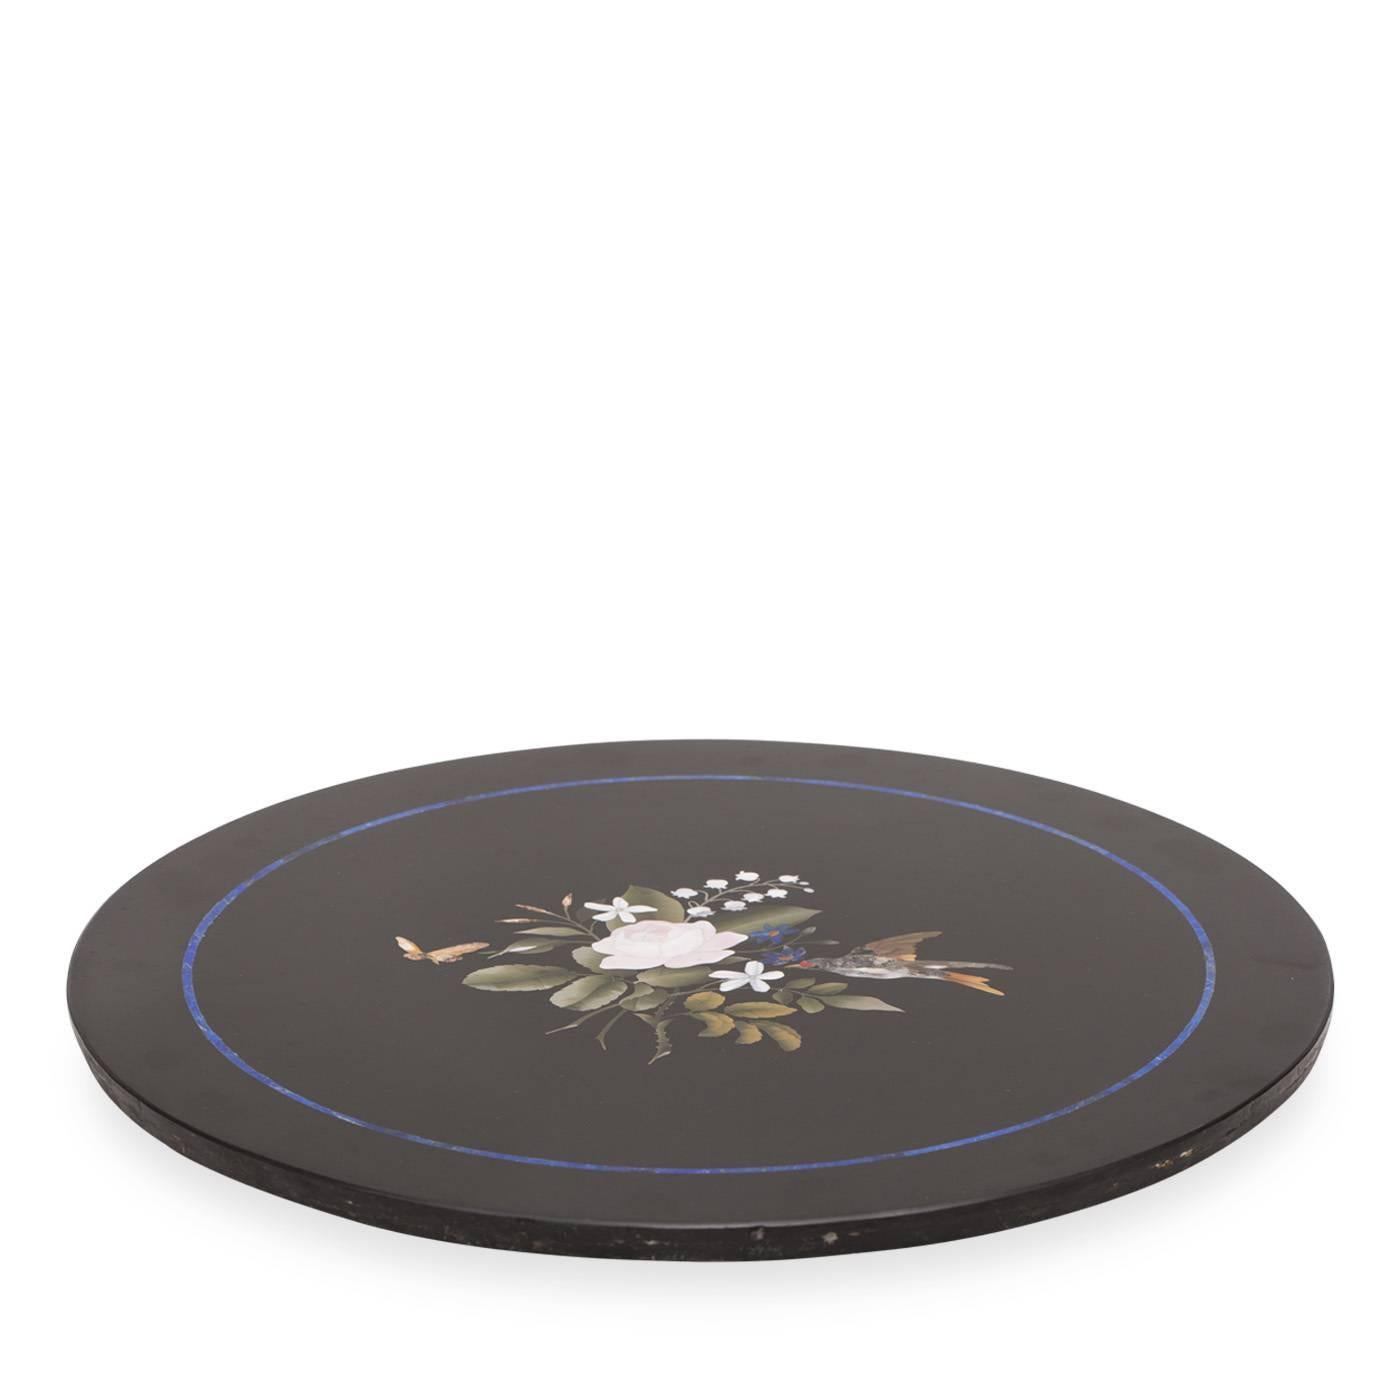 This is a Florentine mosaic table in black Belgian marble with inserts of lapis lazuli and other semi-precious stones. The Azul mosaic table is one of the rarest pieces by Traversari Mosaici for its extraordinary floral detail.